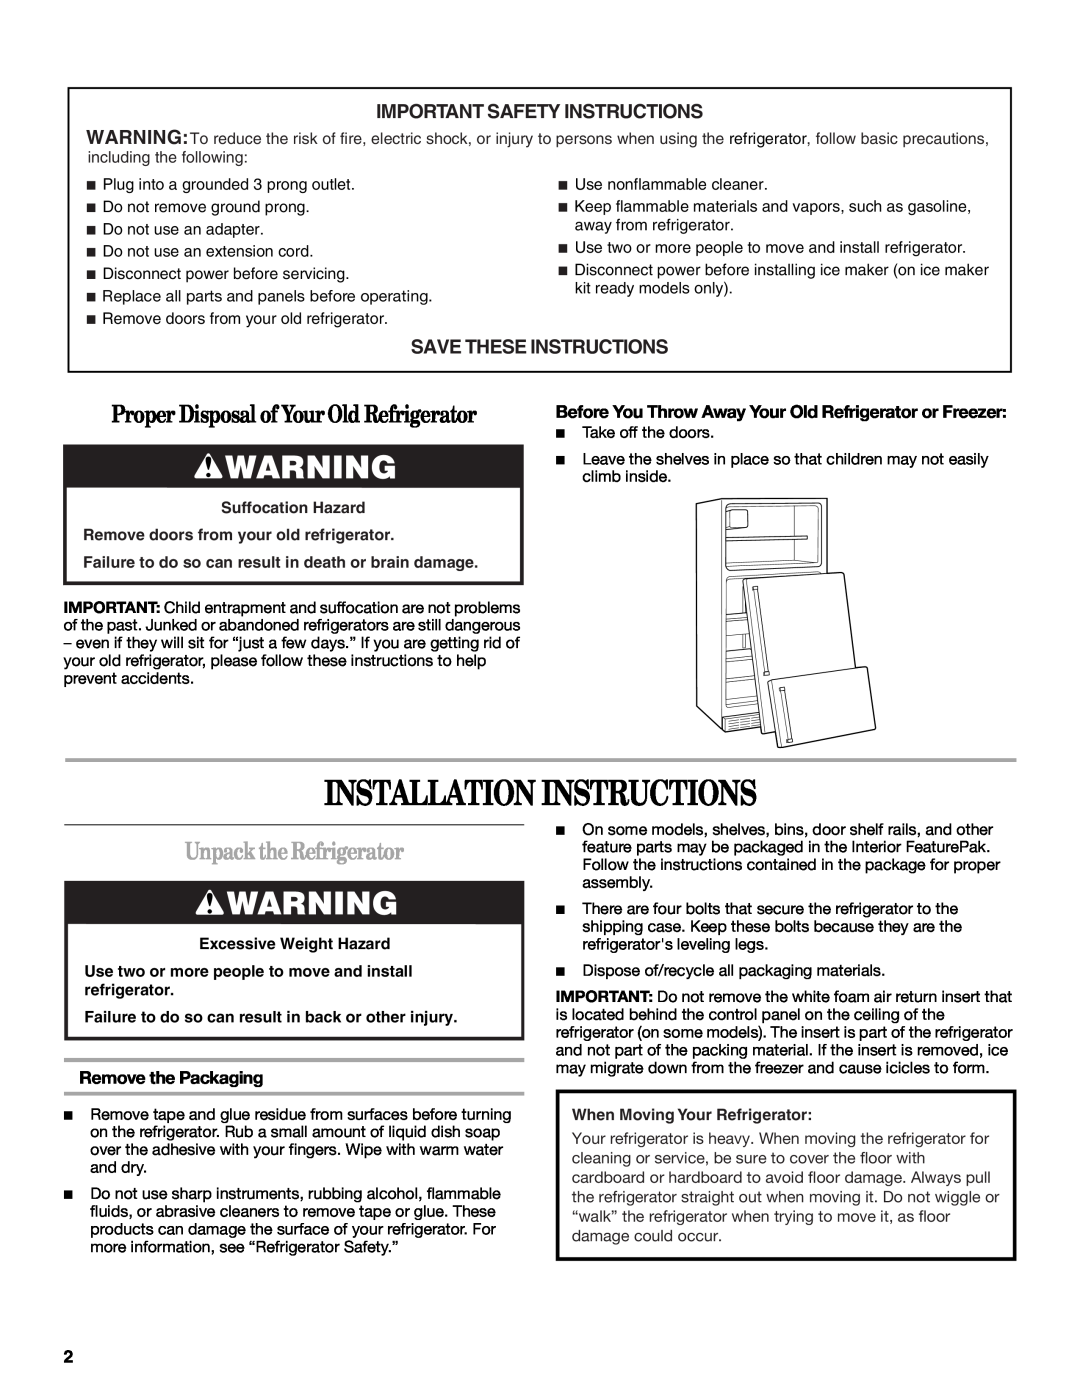 Whirlpool W10224664A Installation Instructions, Unpack the Refrigerator, Important Safety Instructions, Suffocation Hazard 